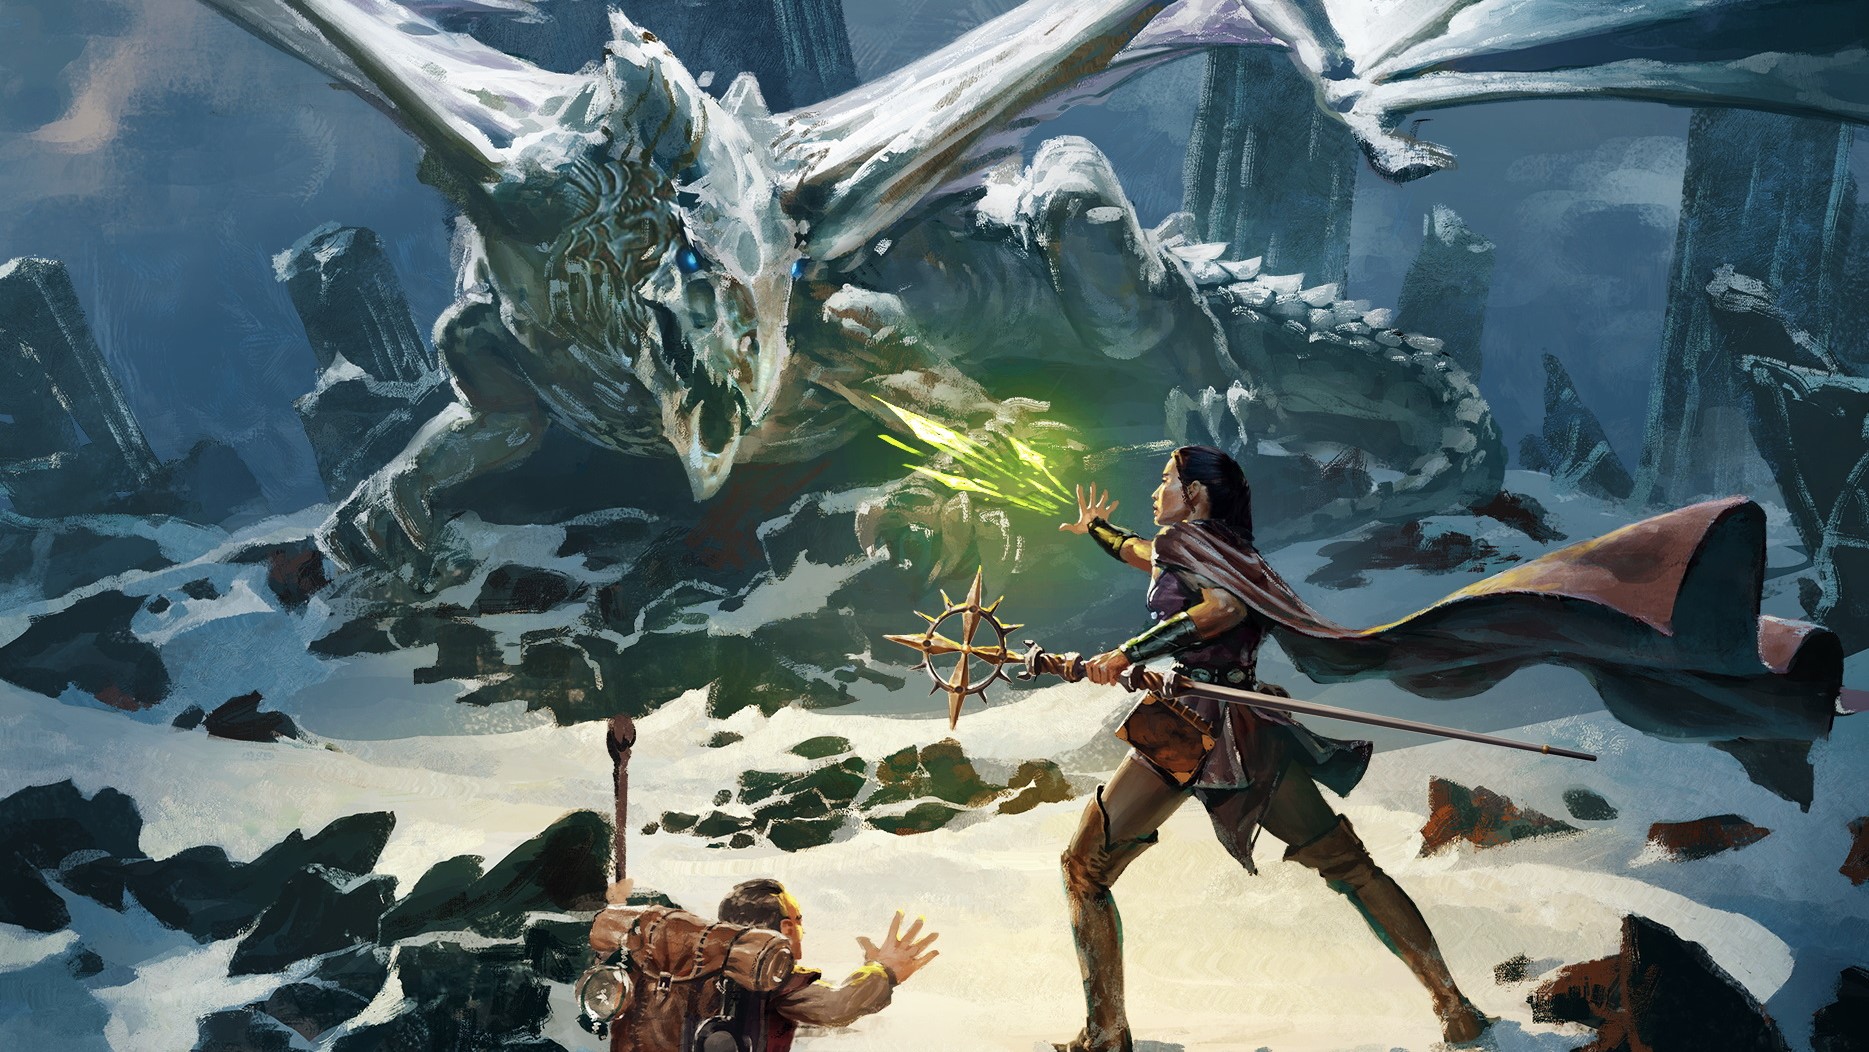 Art of Dungeons & Dragons adventurers fight a dragon.